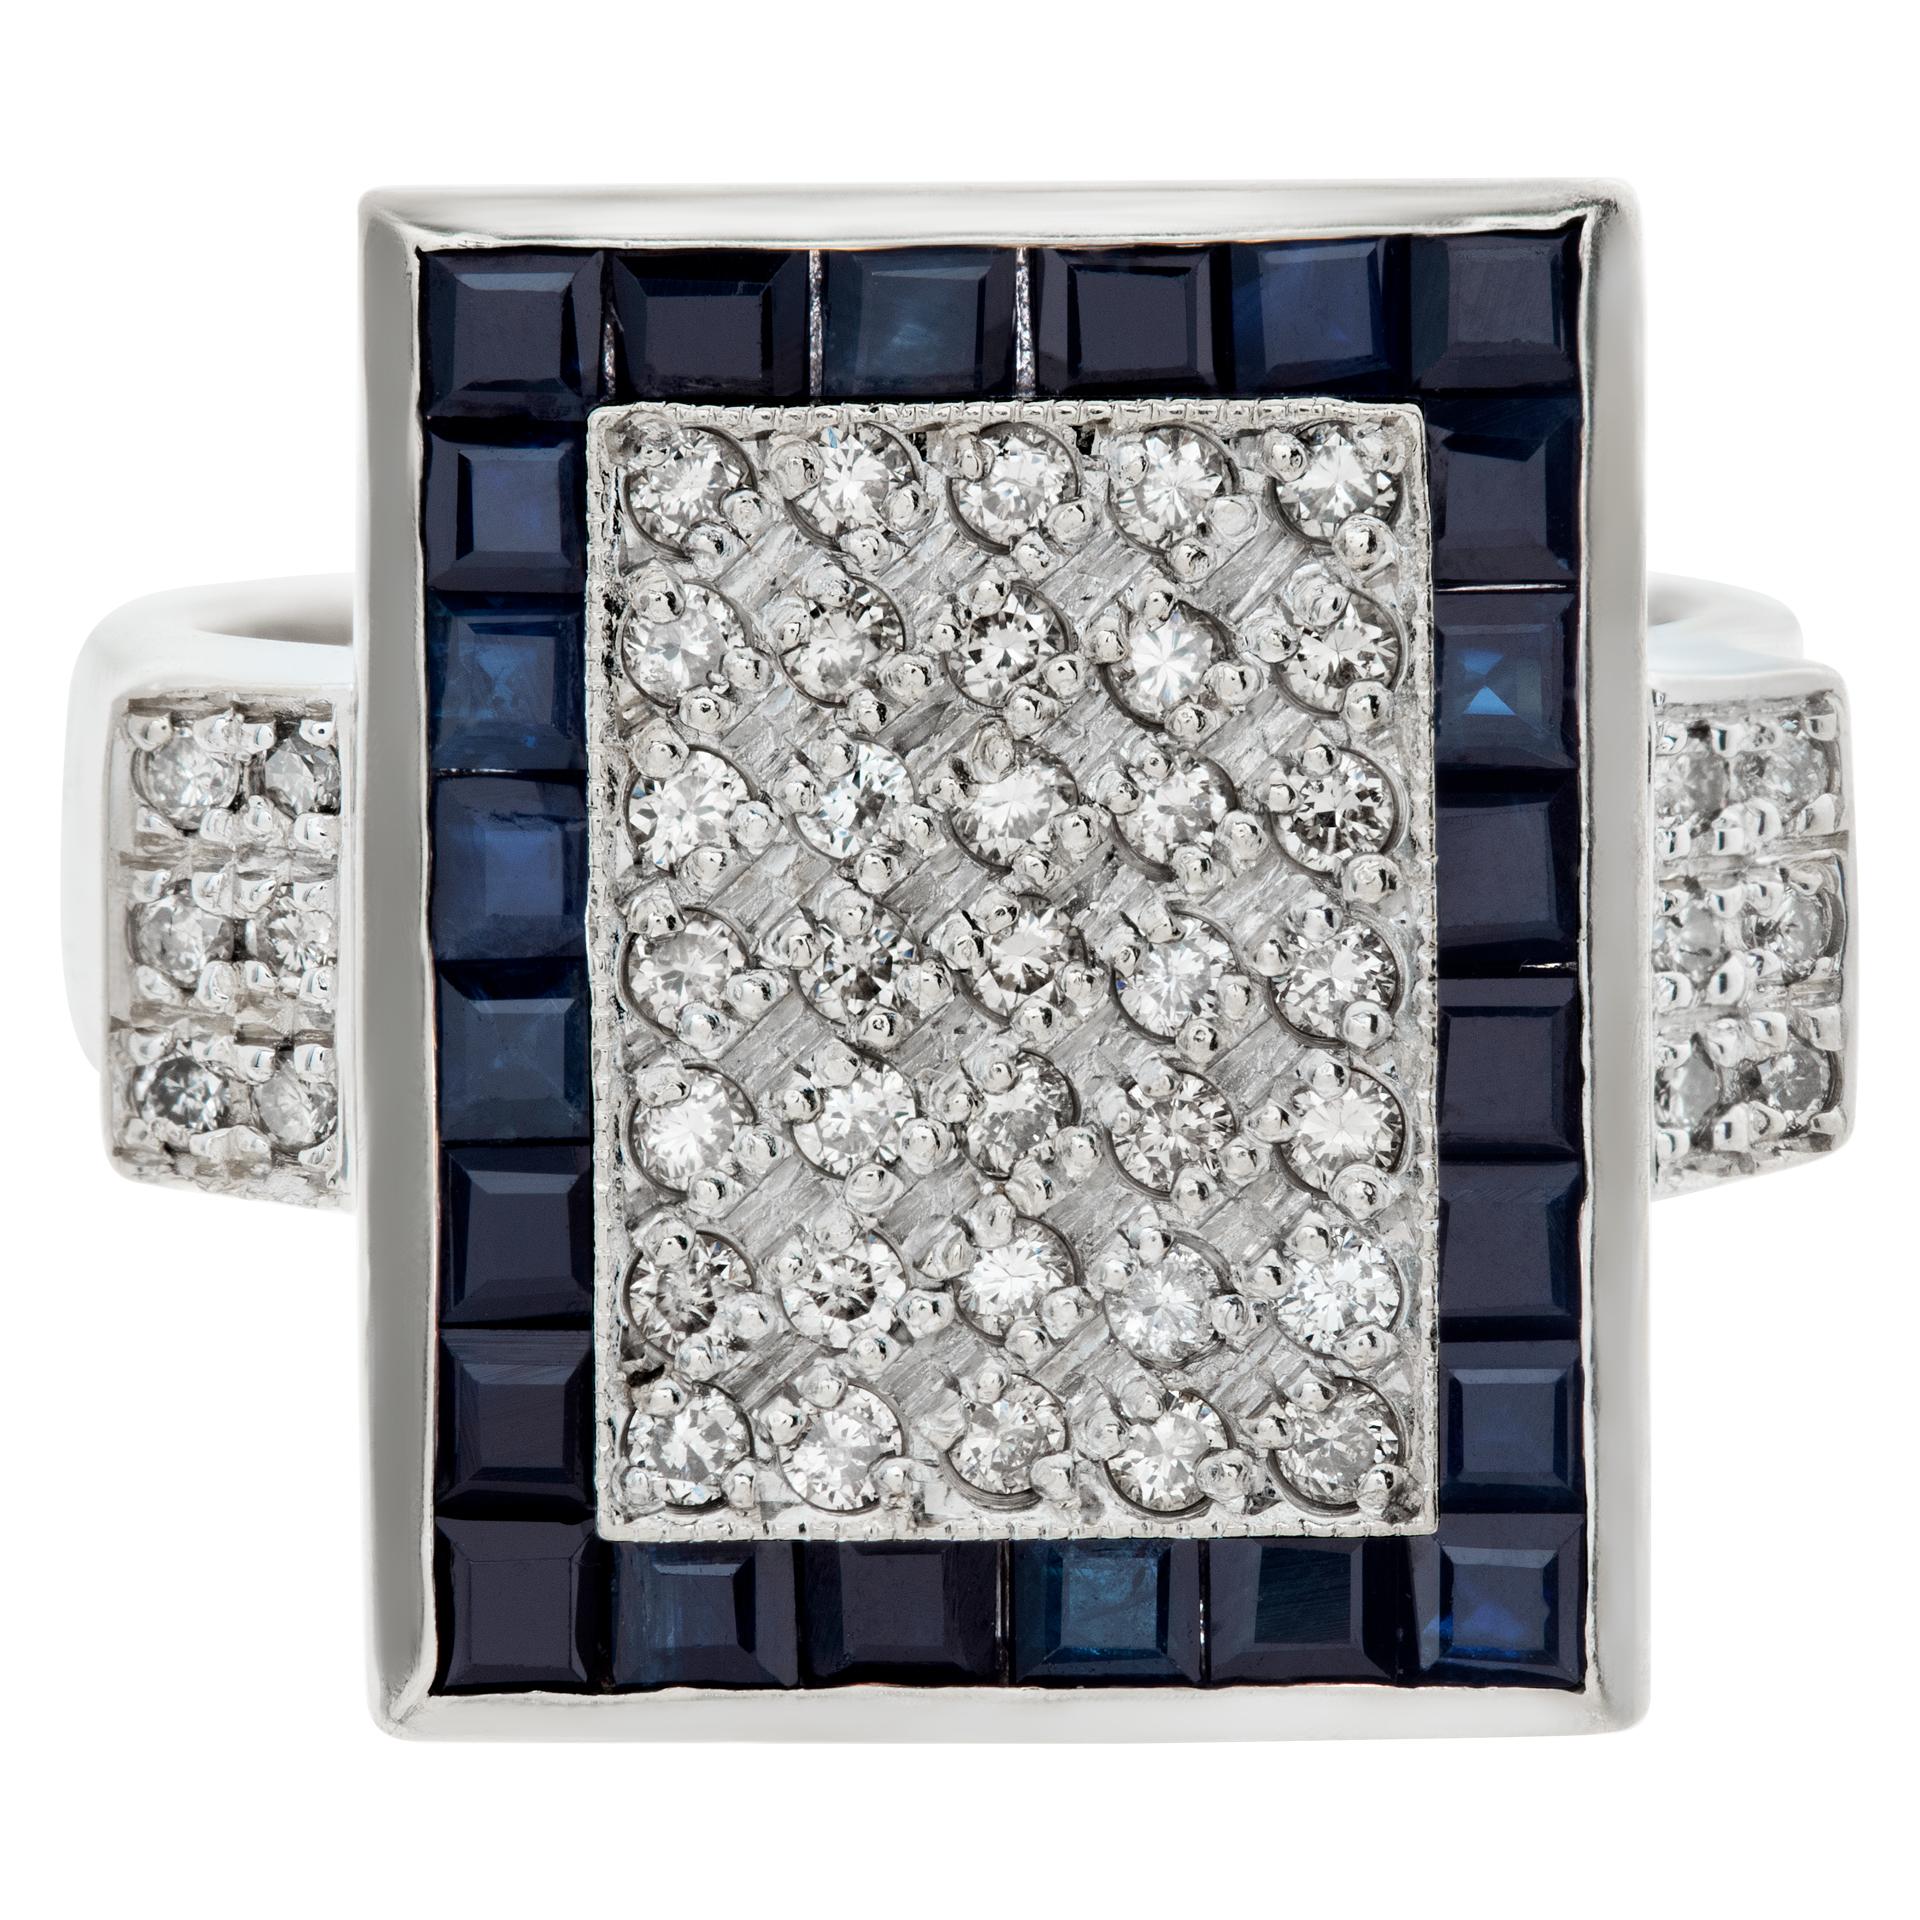 Diamond sheild ring in 18k white gold with 0.75 carats in pave diamonds with dark blue square cut sapphire frame. Size 7.25.This Diamond/Sapphires ring is currently size 7.25 and some items can be sized up or down, please ask! It weighs 6.6